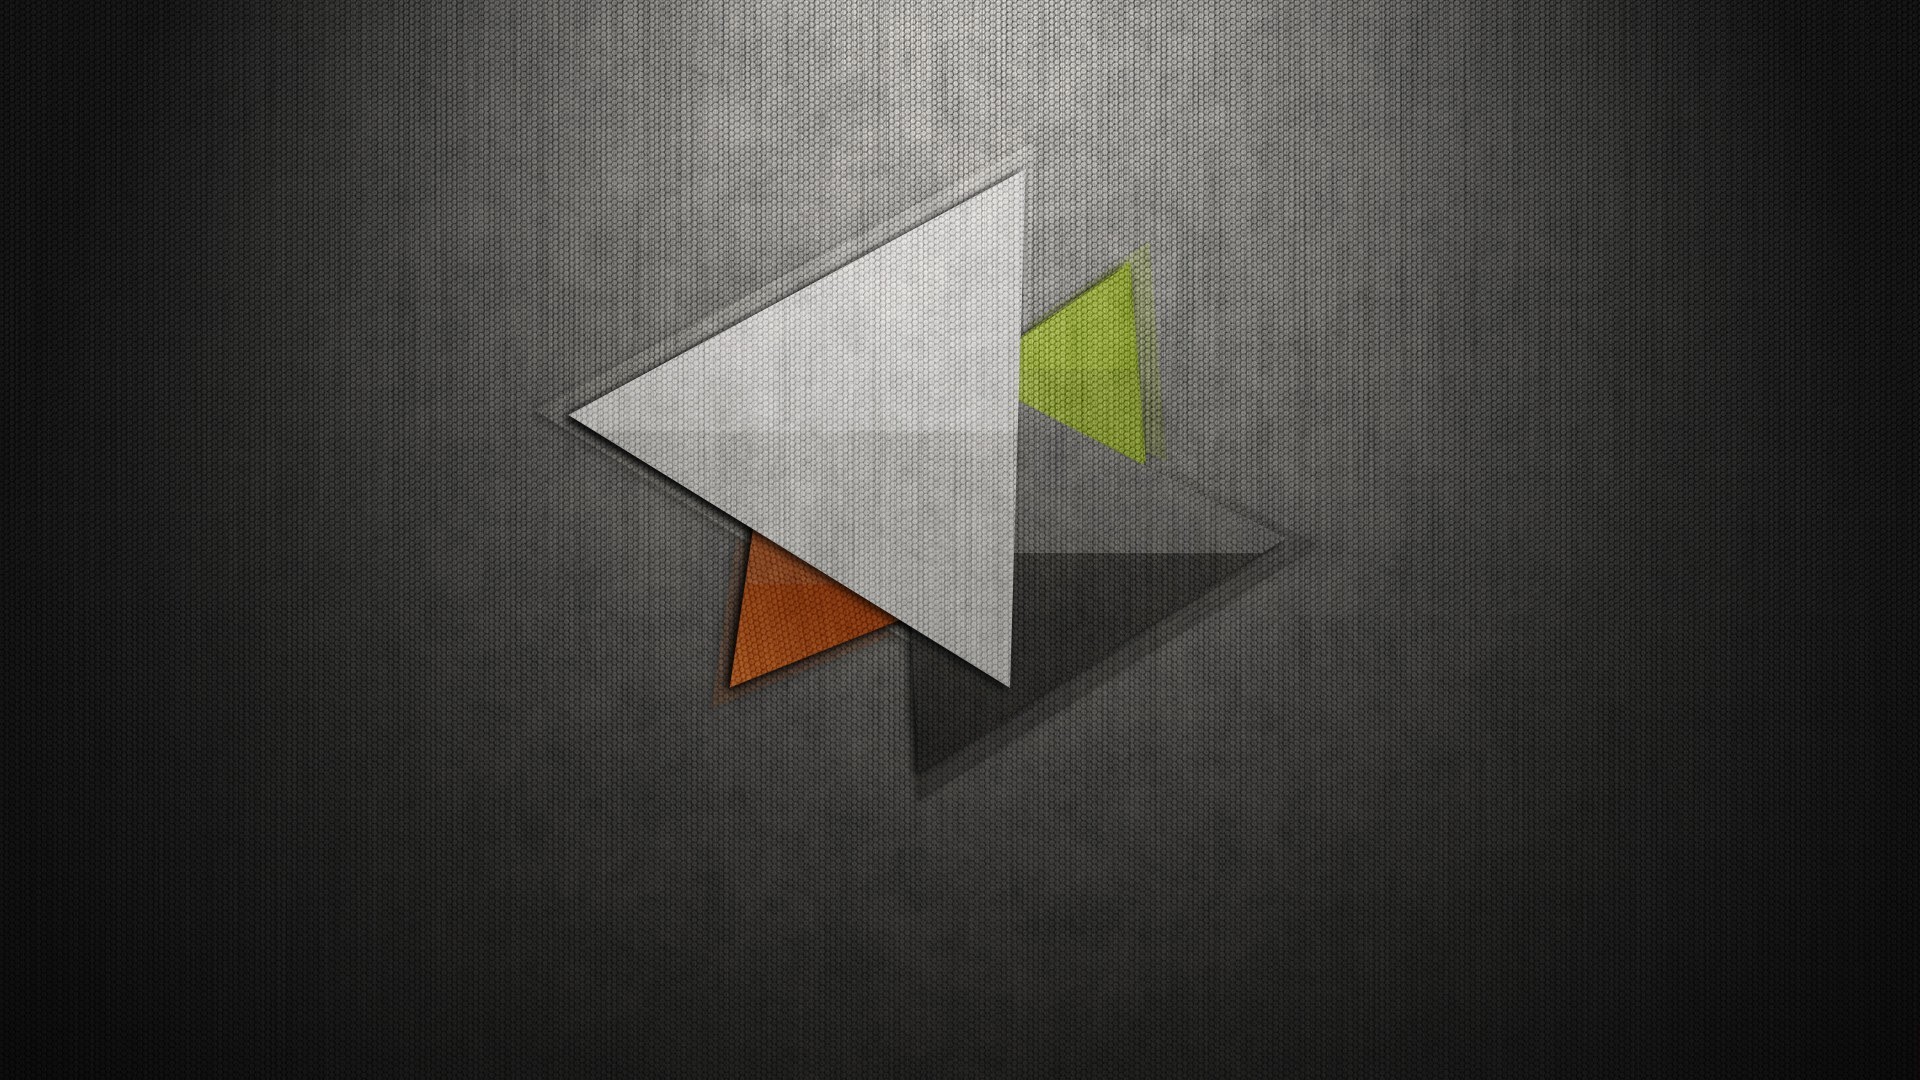 General 1920x1080 triangle artwork minimalism texture geometry geometric figures abstract gray background